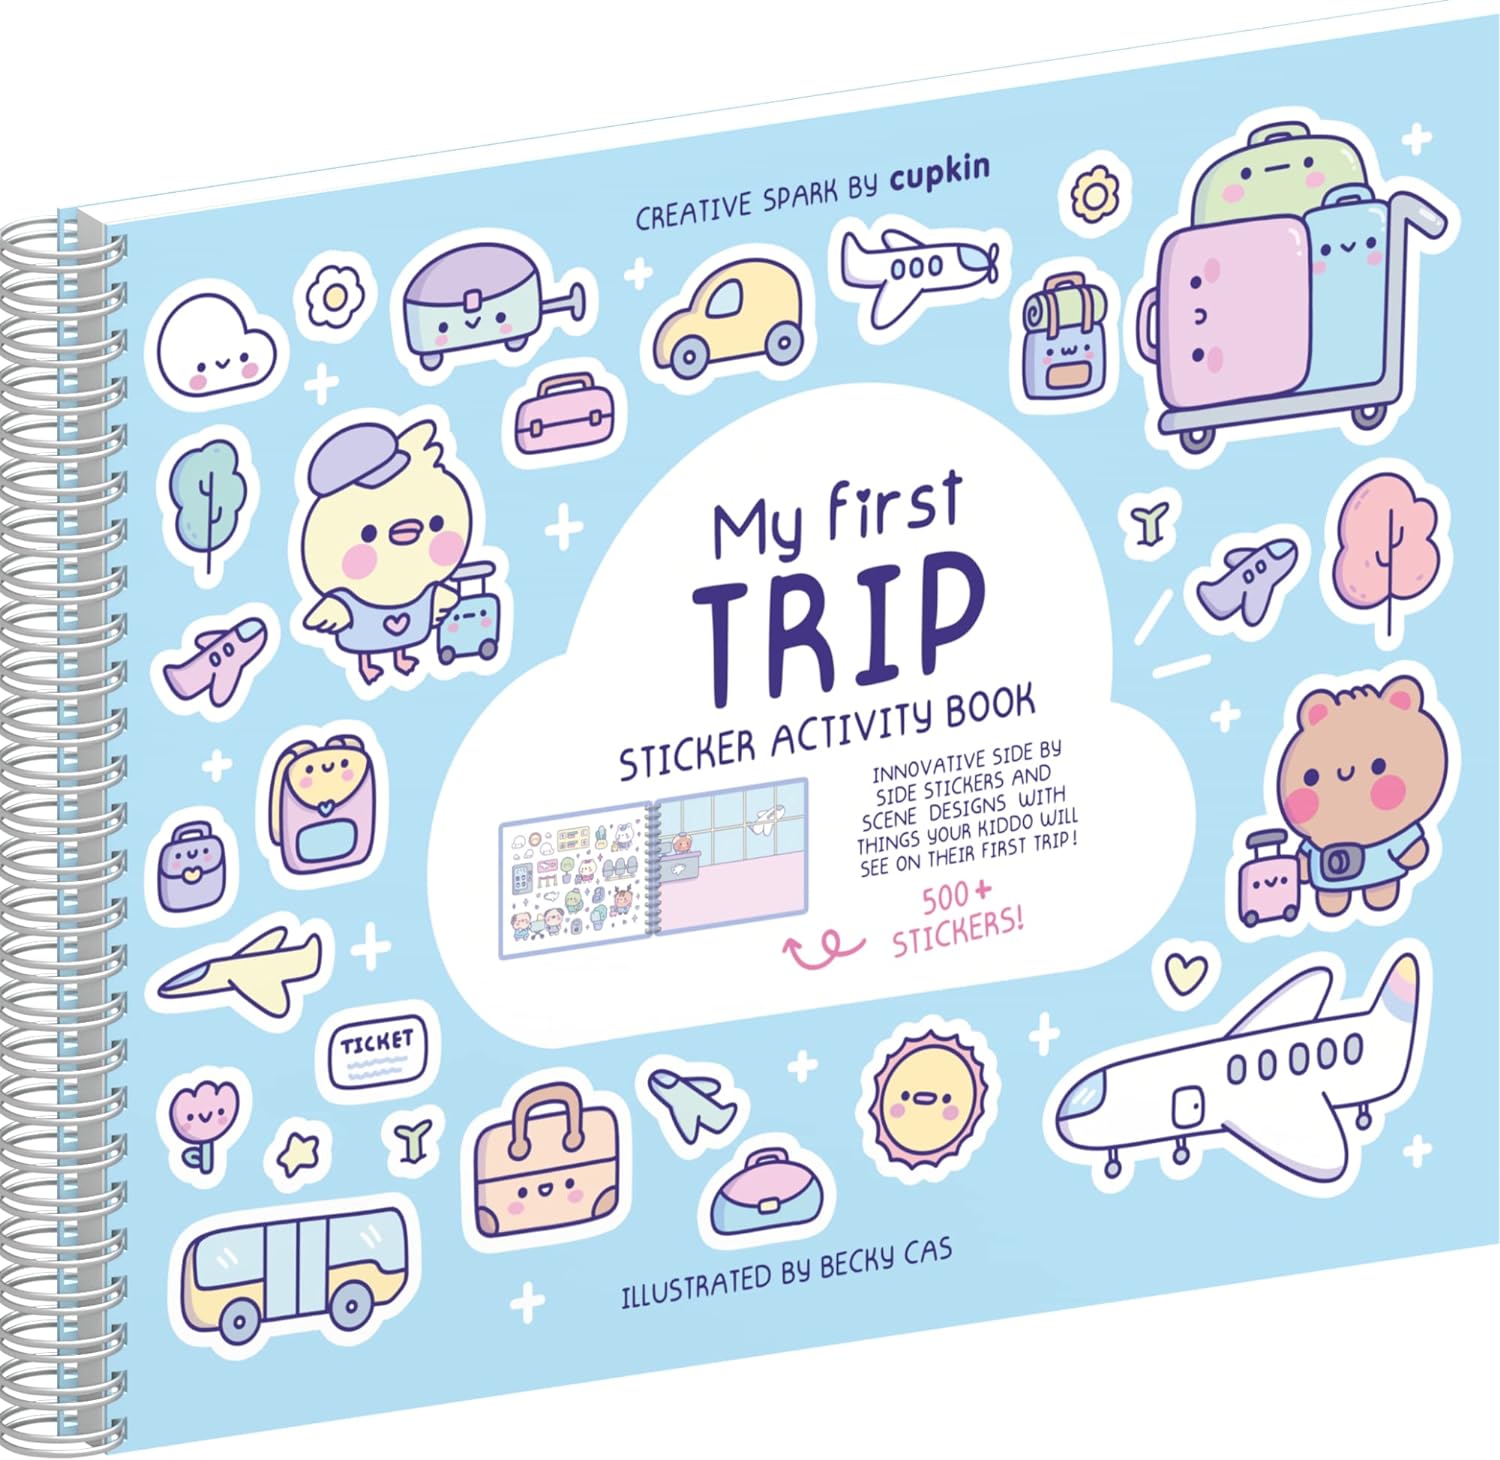 My First Trip Sticker + Coloring Book (500+ Stickers  12 Scenes) by Cupkin - Side by Side Activity Book Design - Fun Toddler Travel Essential Sticker Books for Kids 2-4 - Great for Older Boys  Girls